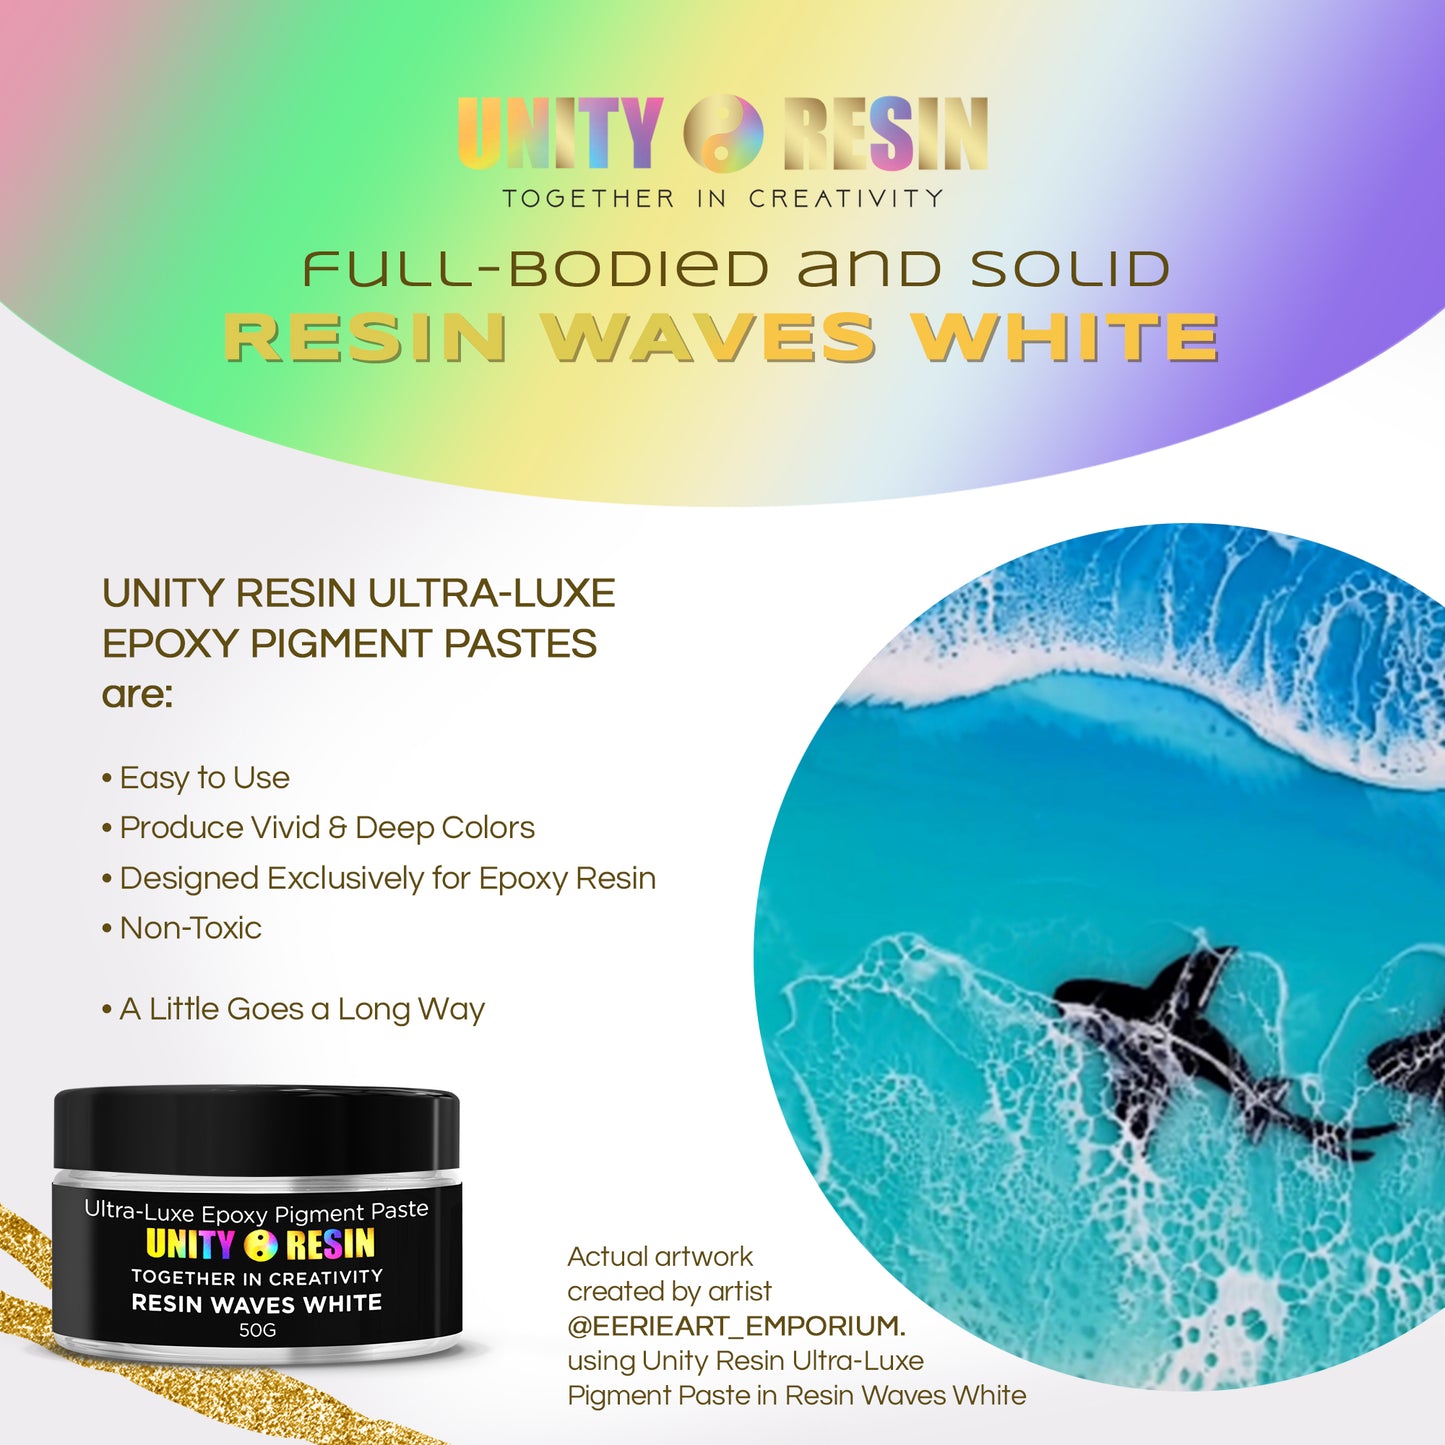 Ultra-Luxe Epoxy Resin Pigment Paste- RESIN WAVES WHITE